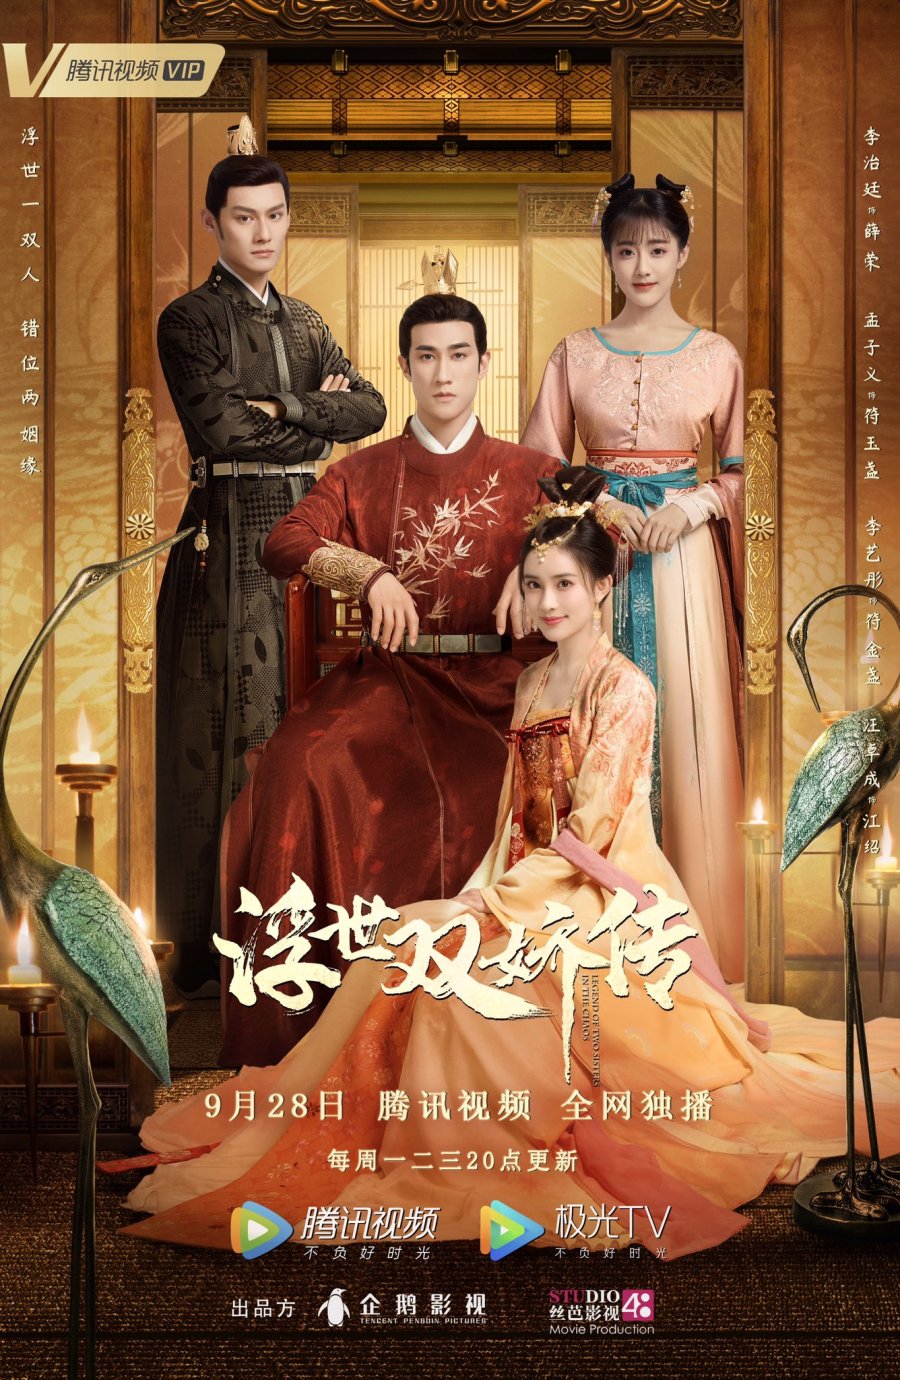 Phù thế song kiều truyện - Legend of Two Sisters In the Chaos (2020)